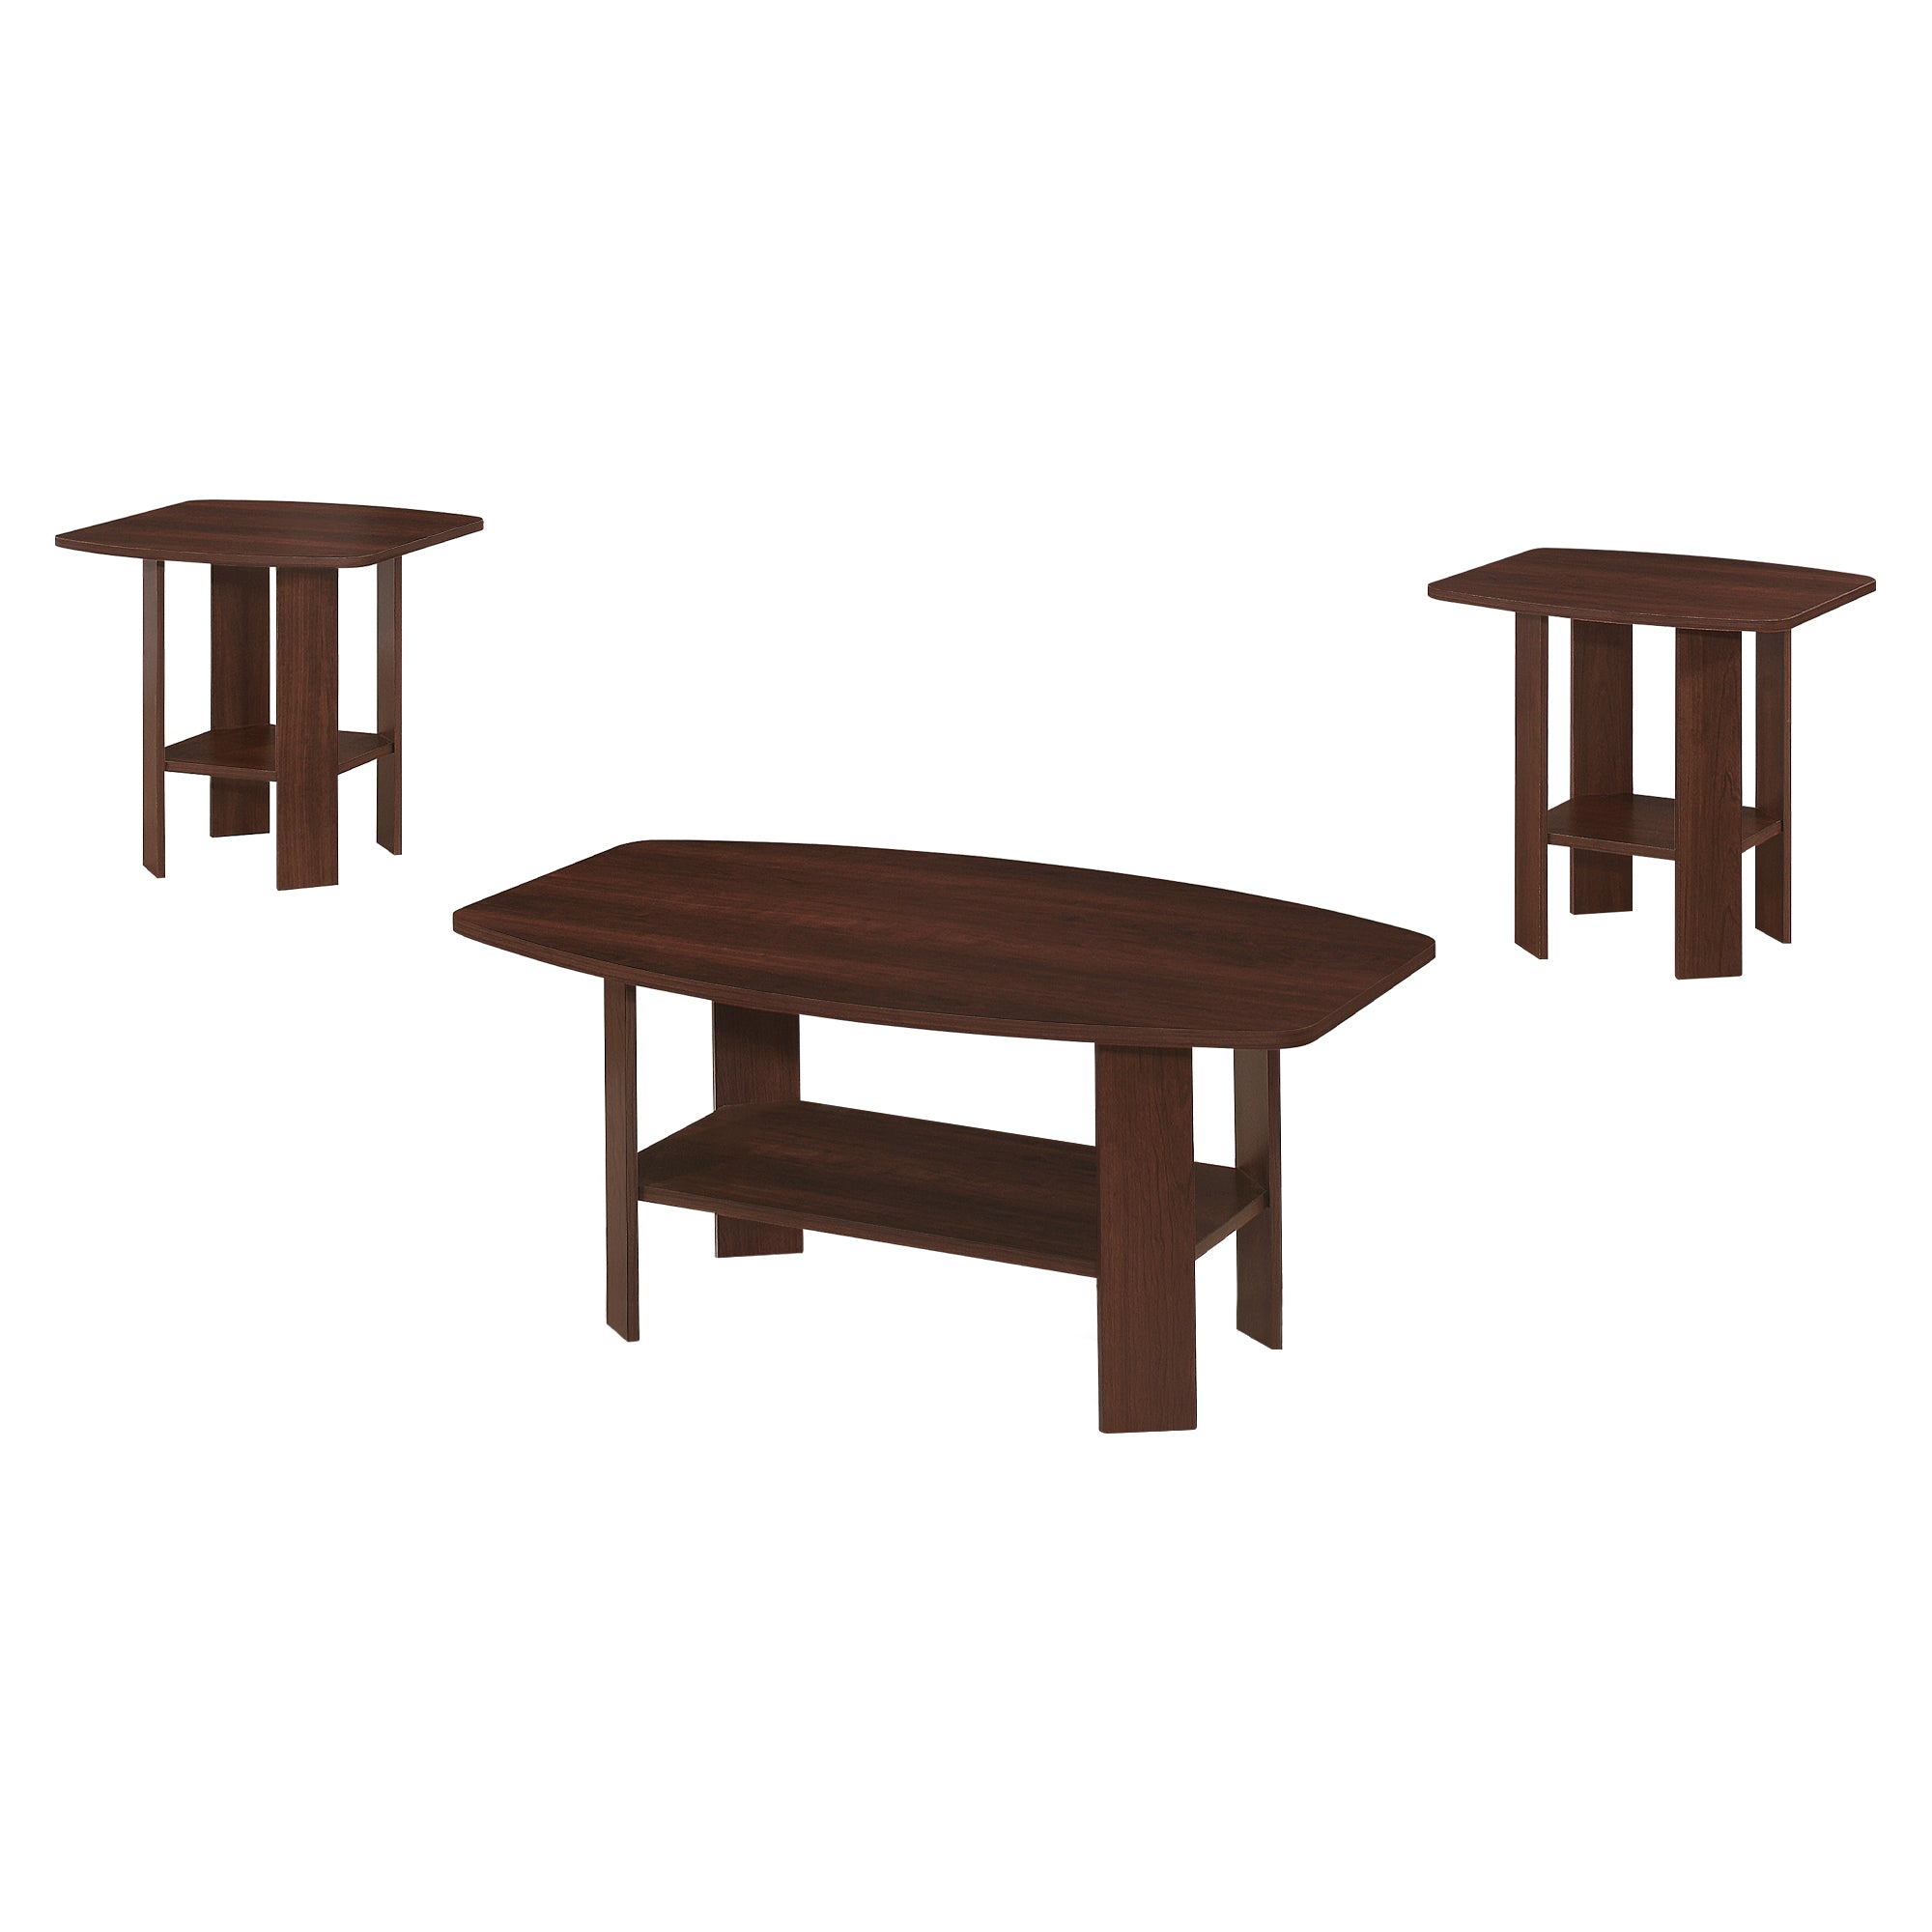 MN-647923P    Table Set, 3Pcs Set, Coffee, End, Side, Accent, Living Room, Laminate, Cherry, Contemporary, Modern